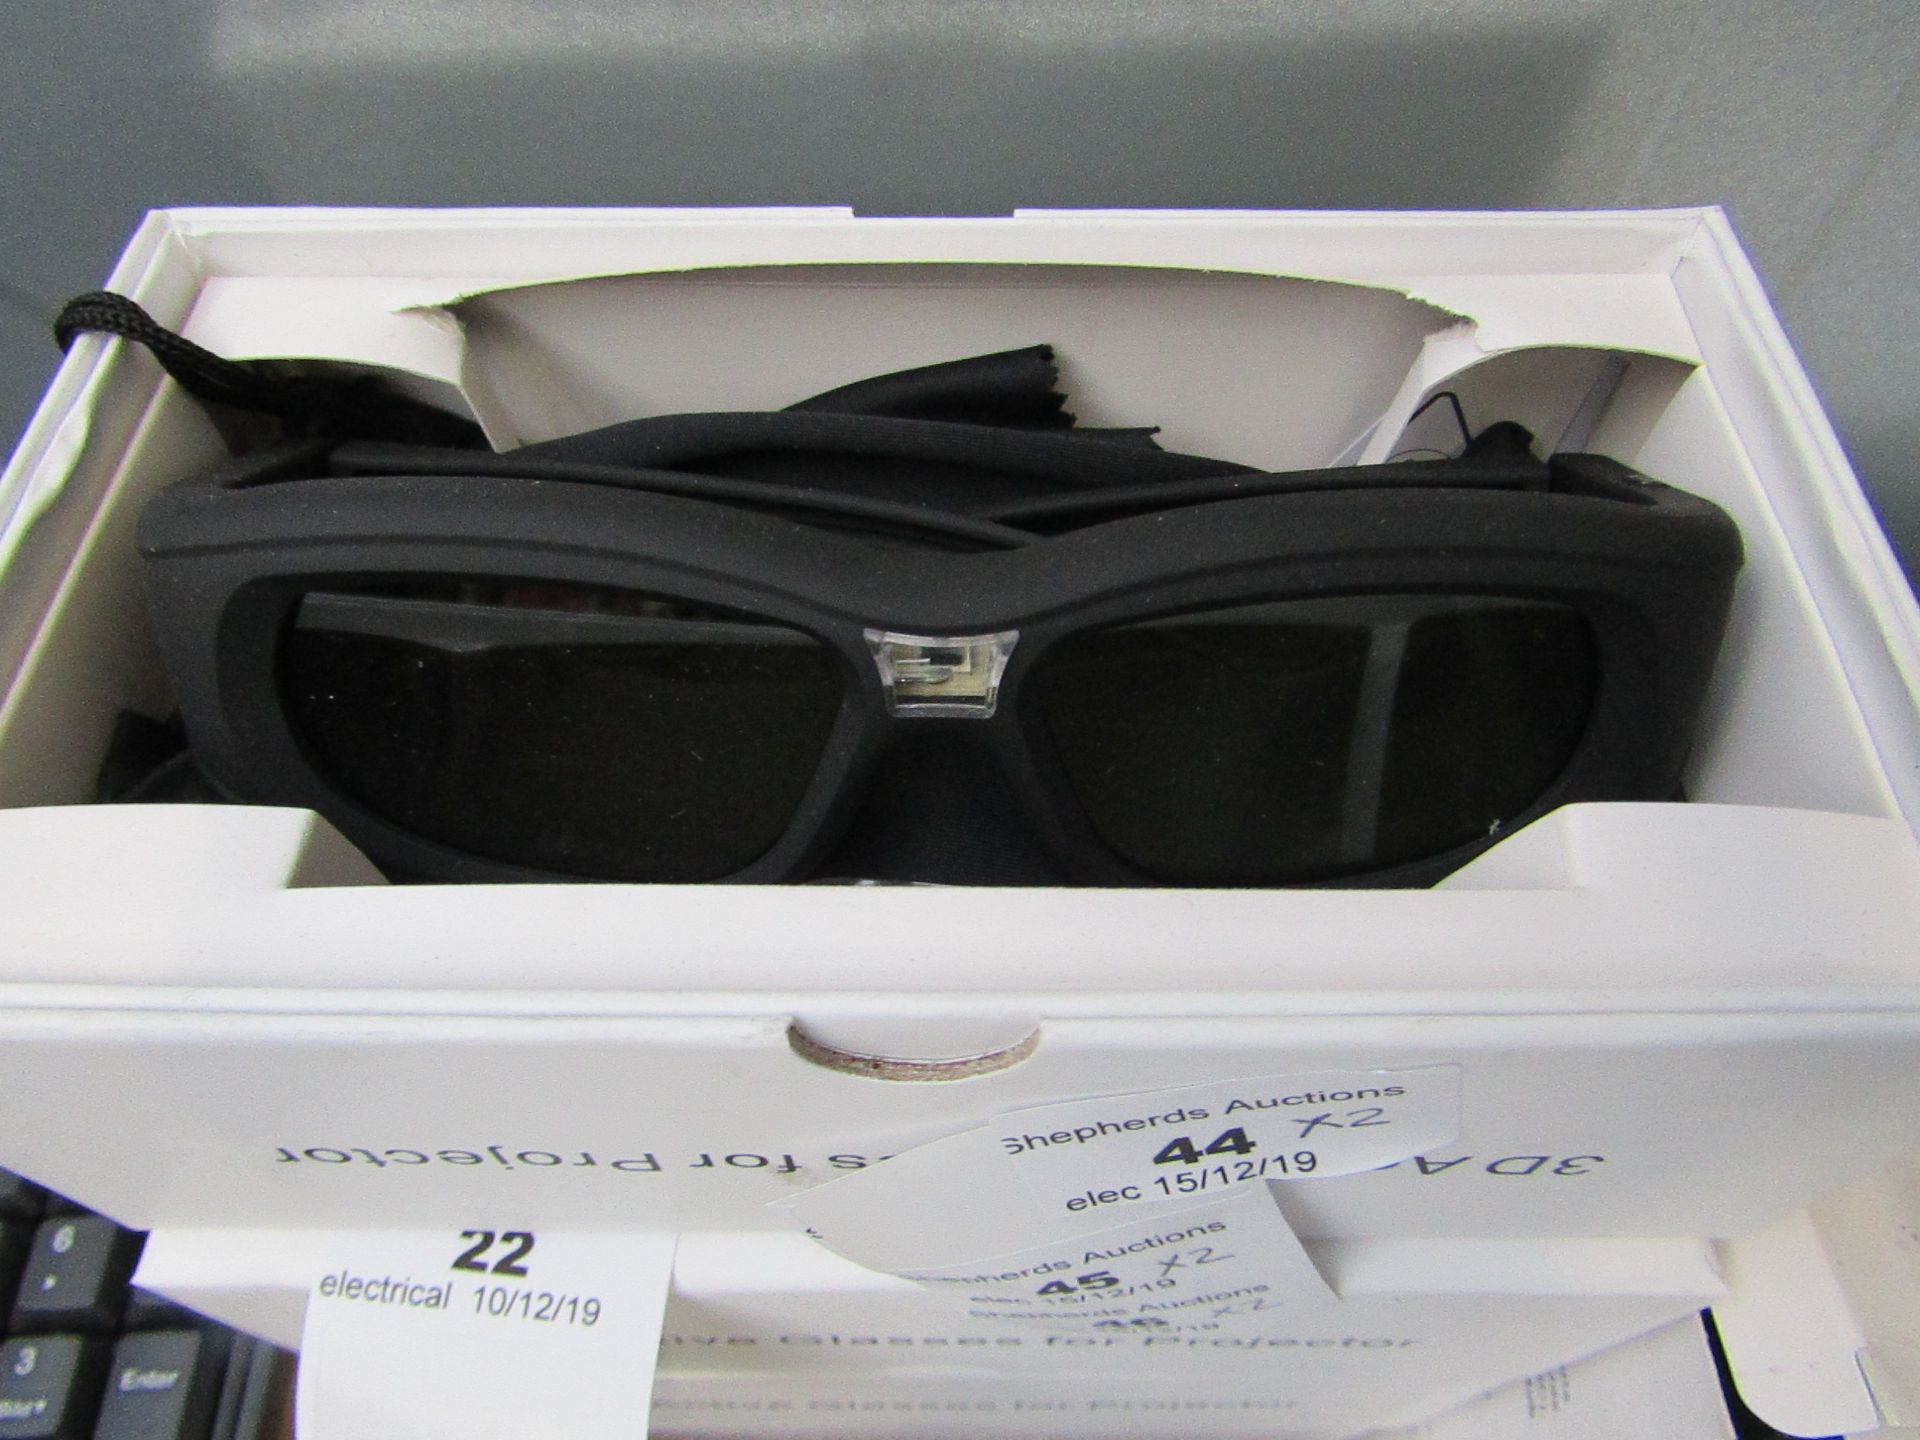 2 Boxes of 3D Active Glasses for Projector, new & Boxed.